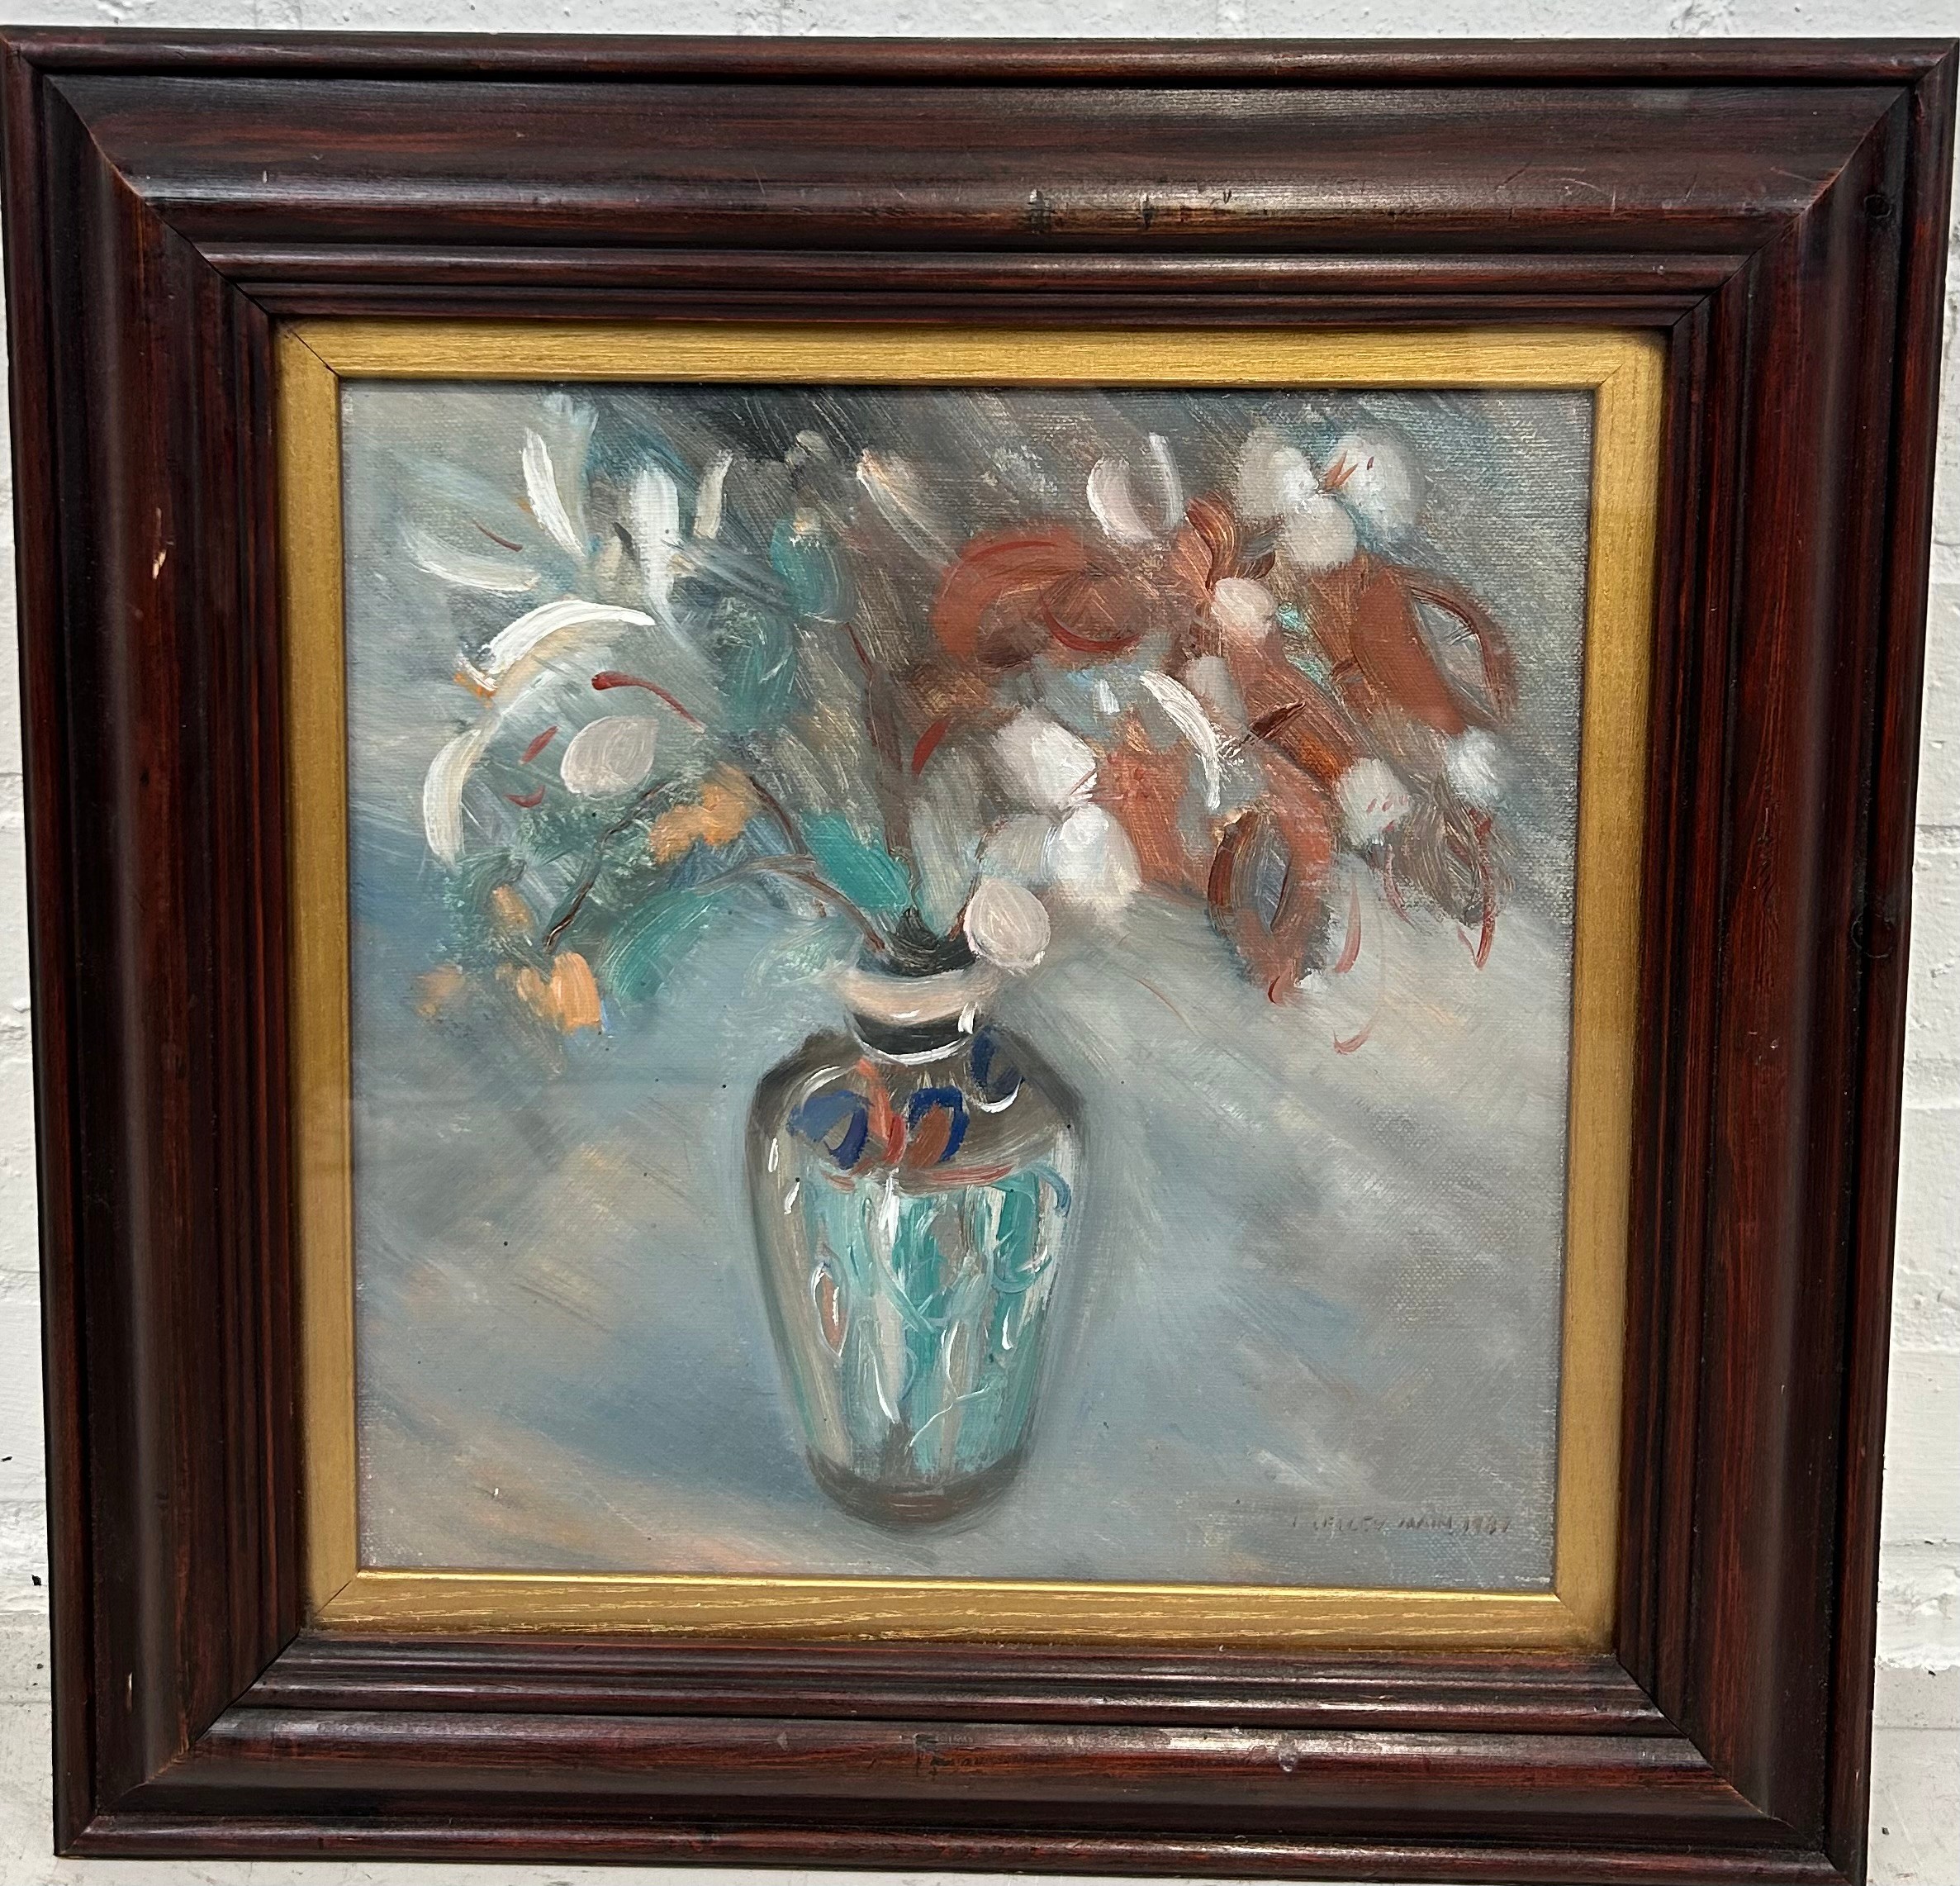 AN OIL ON CANVAS PAINTING DEPICTING VASE WITH FLOWERS, Signed indistinctly 'Main 1987' 29cm x 29cm